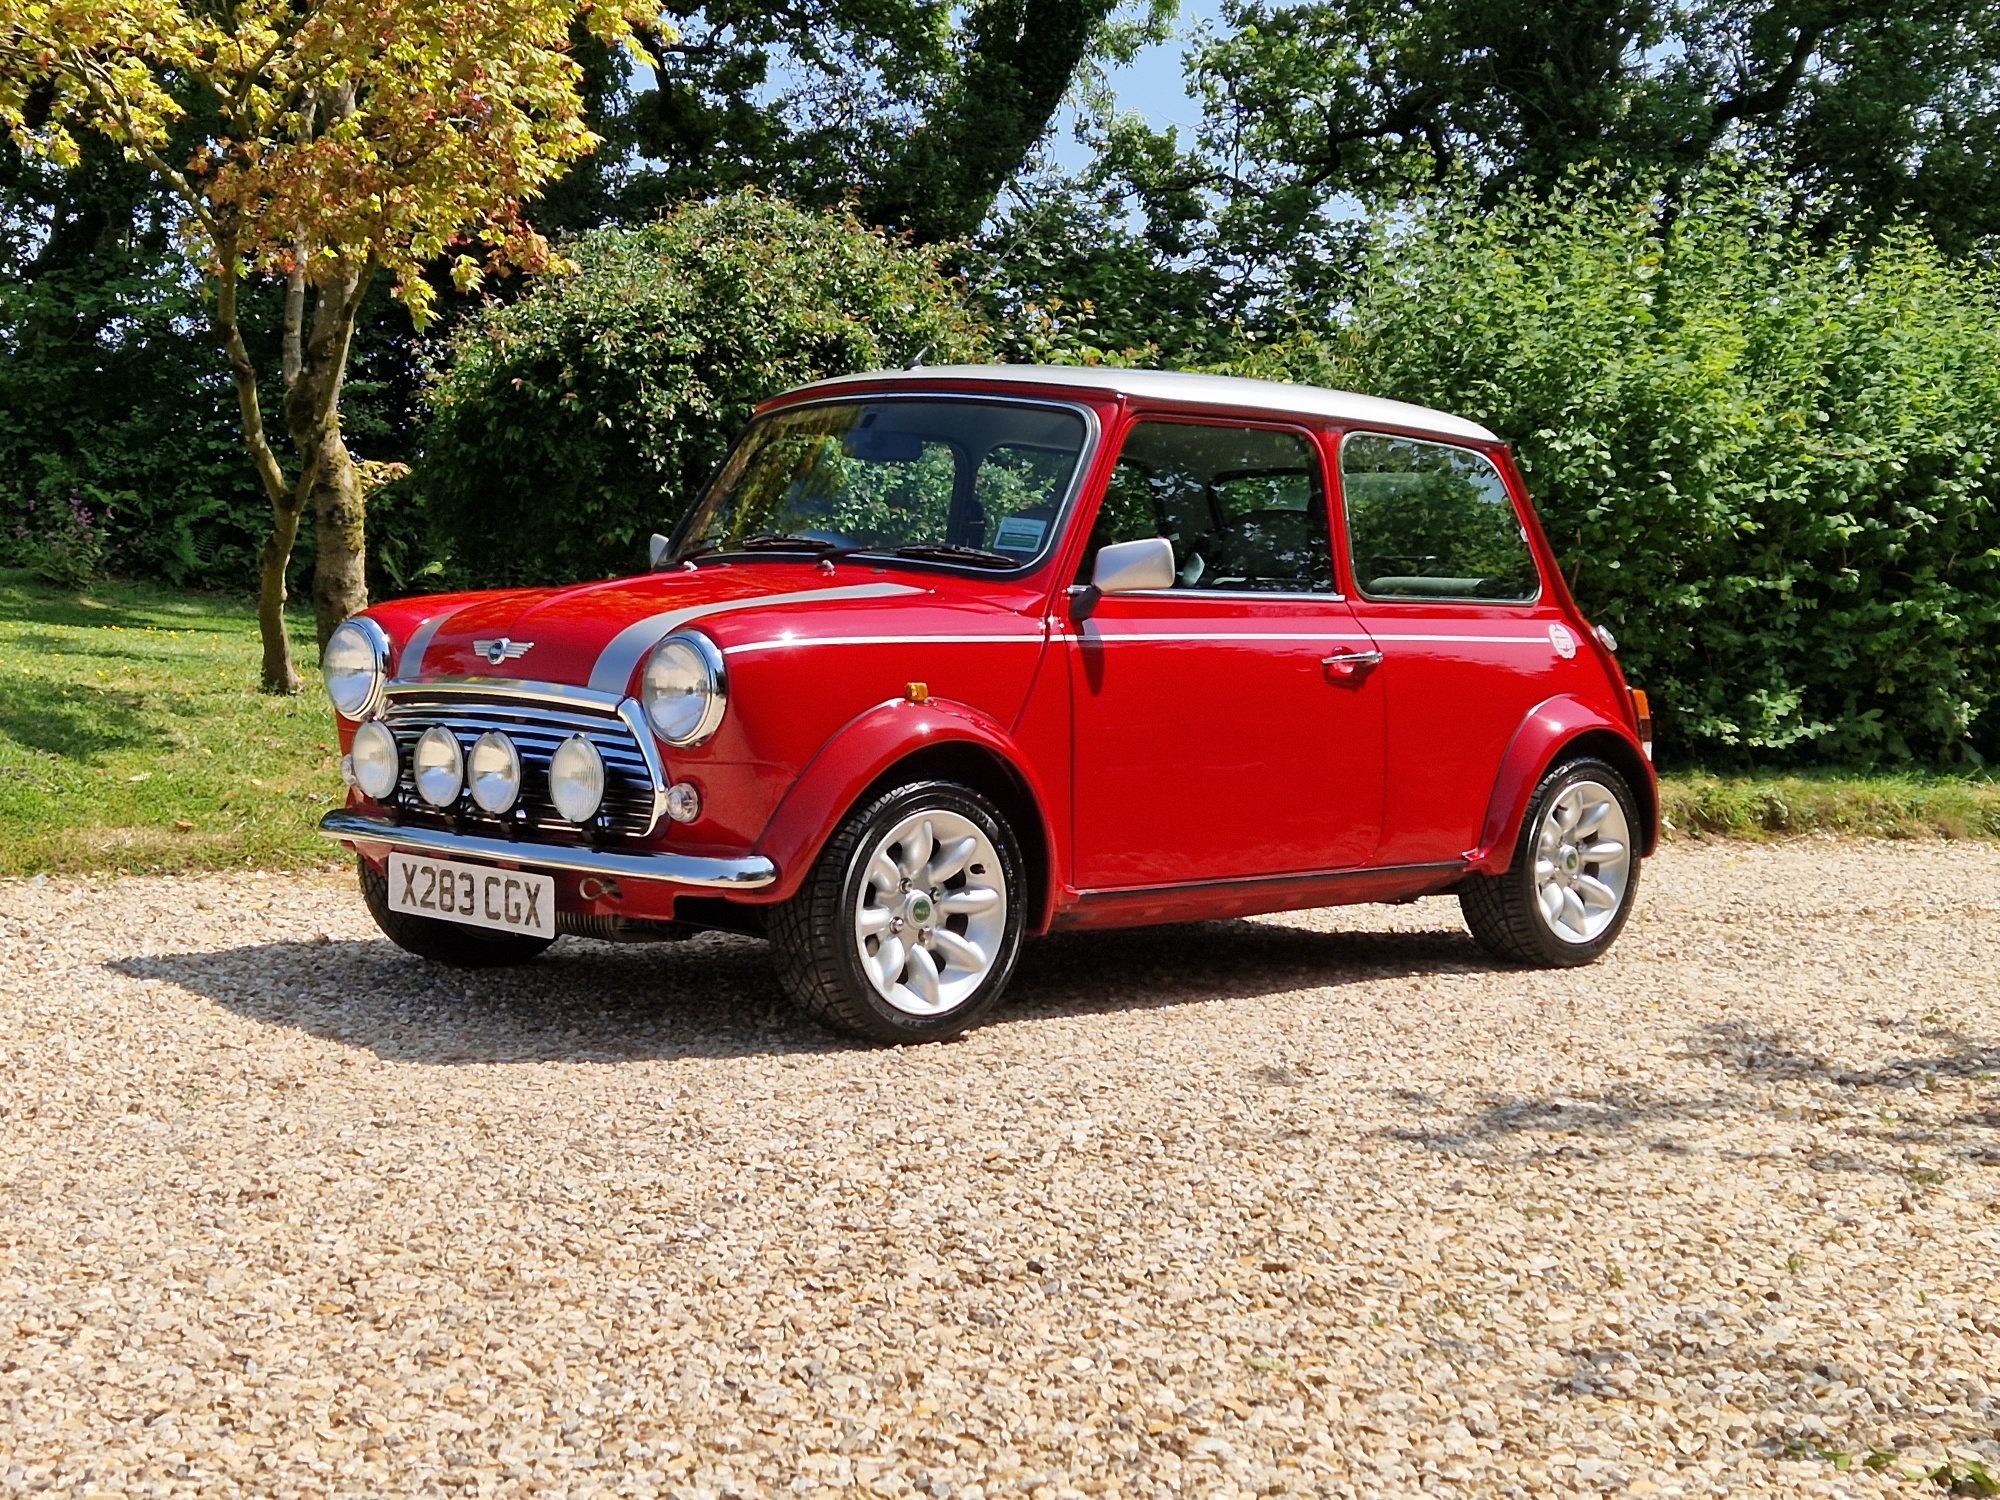 ** NOW SOLD ** 2001 Mini Cooper Sport 500 On Just 27450 Miles From New!